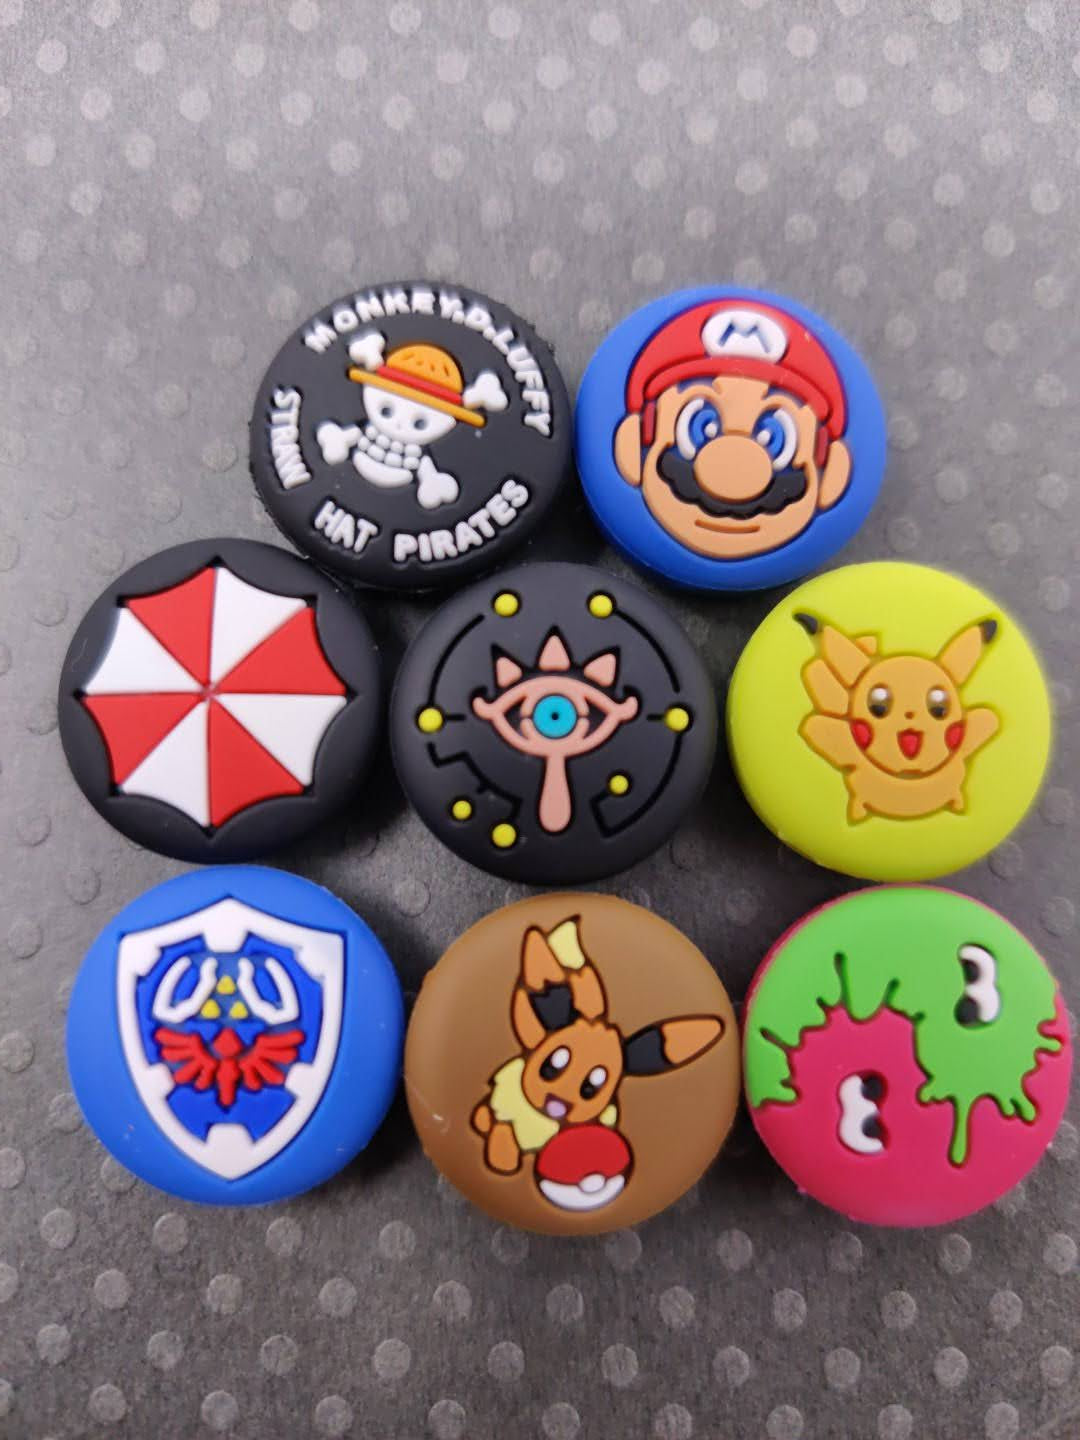 Character and Logo Nintendo Switch Joy-Con Thumbcap Grips